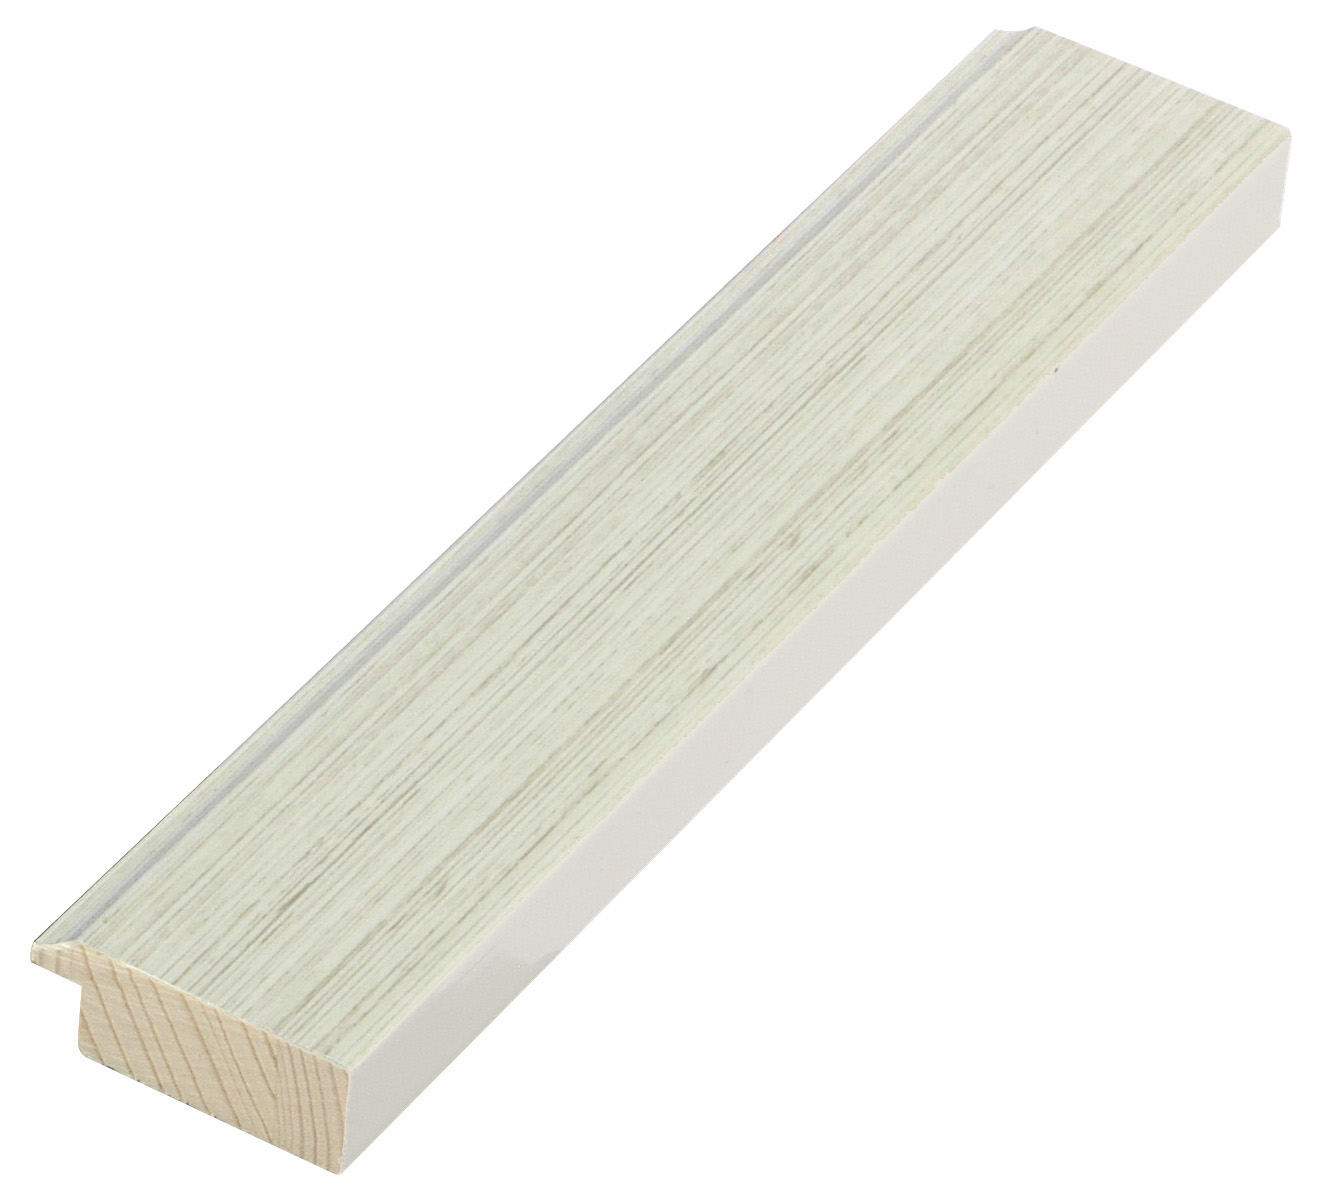 Liner finger-jointed pine 38mm - Cream, wired texture